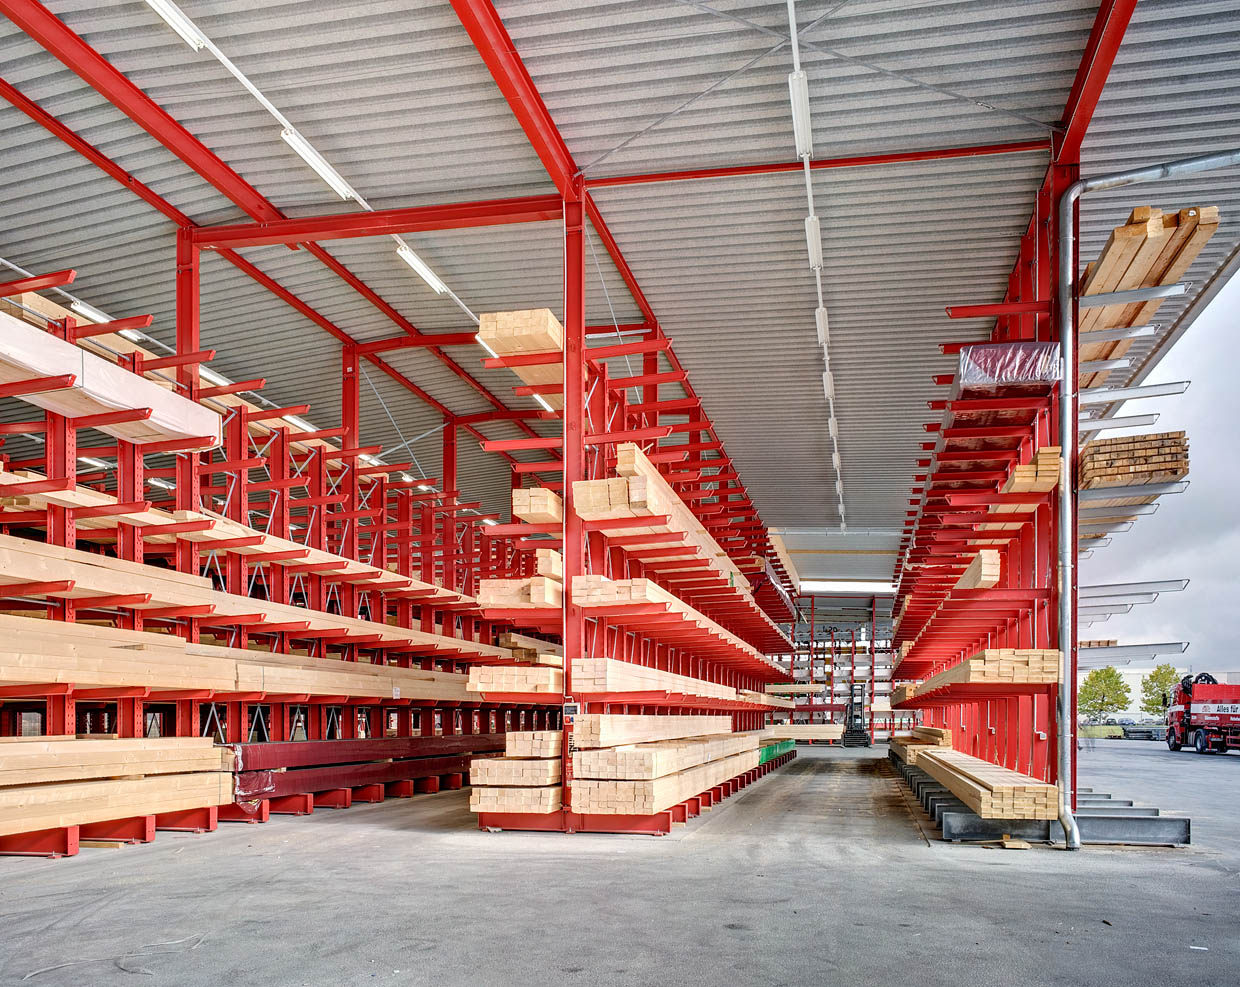 [Translate "Portugal"] Rack-clad warehouse Cantilever racking